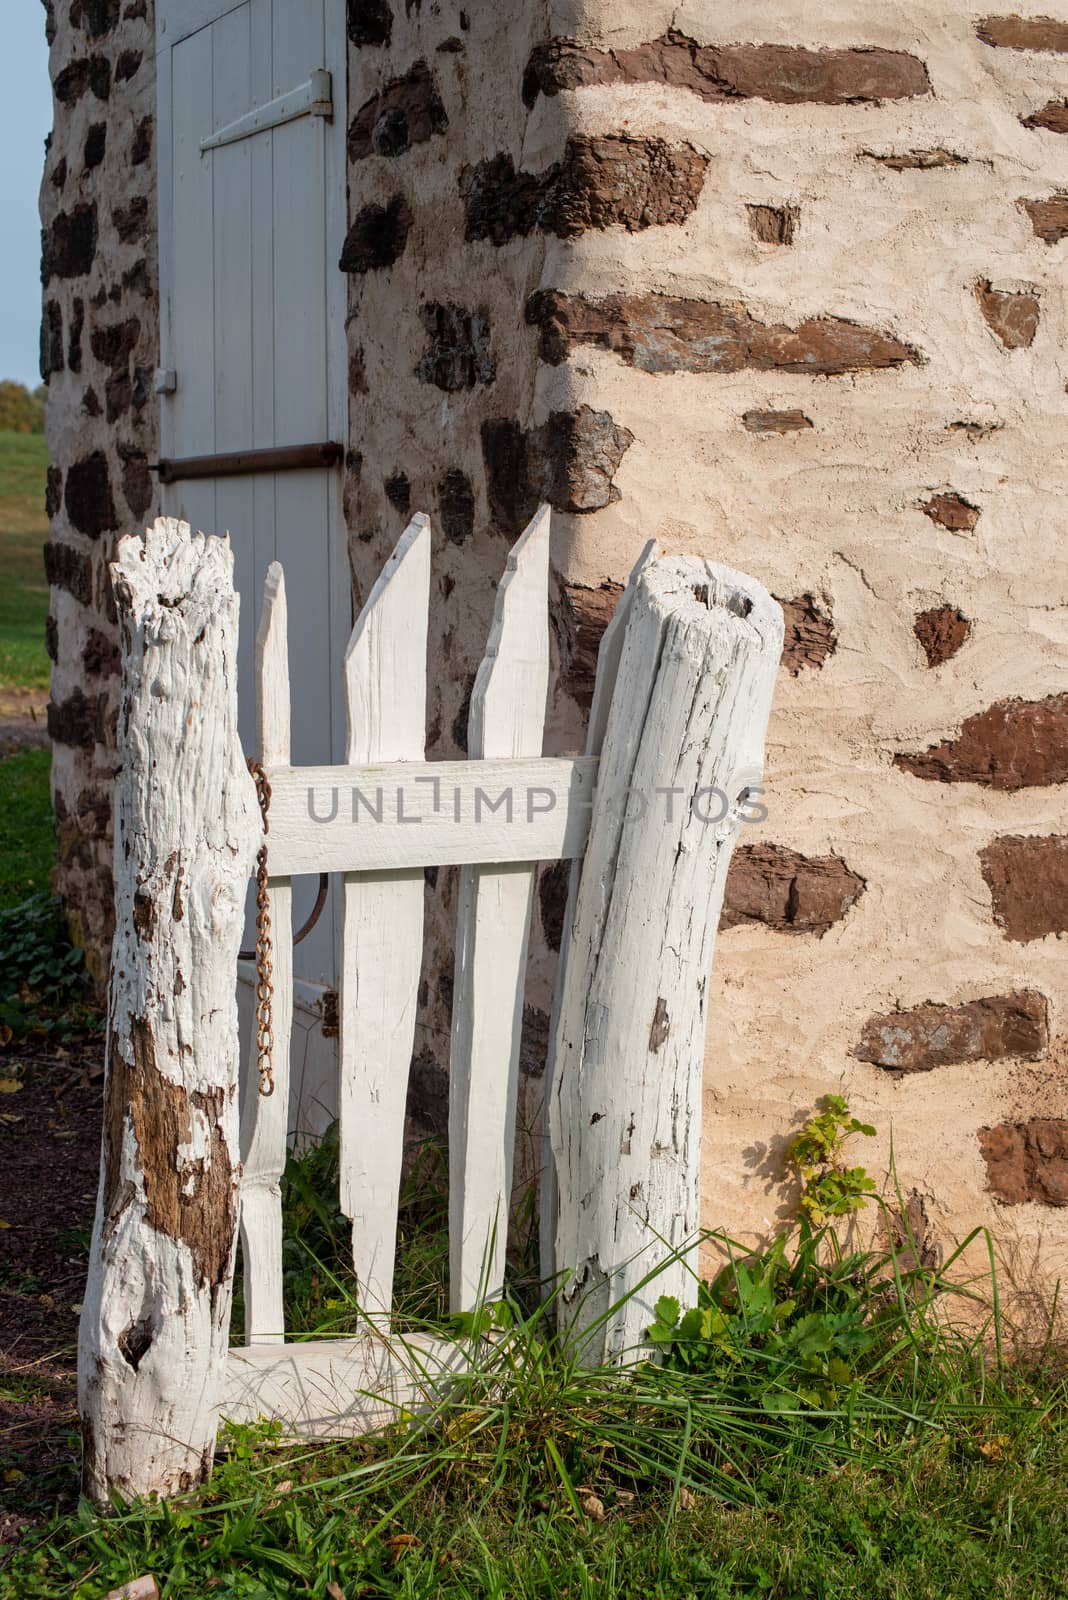 Rustic white garden gate by colonial stone building. by marysalen